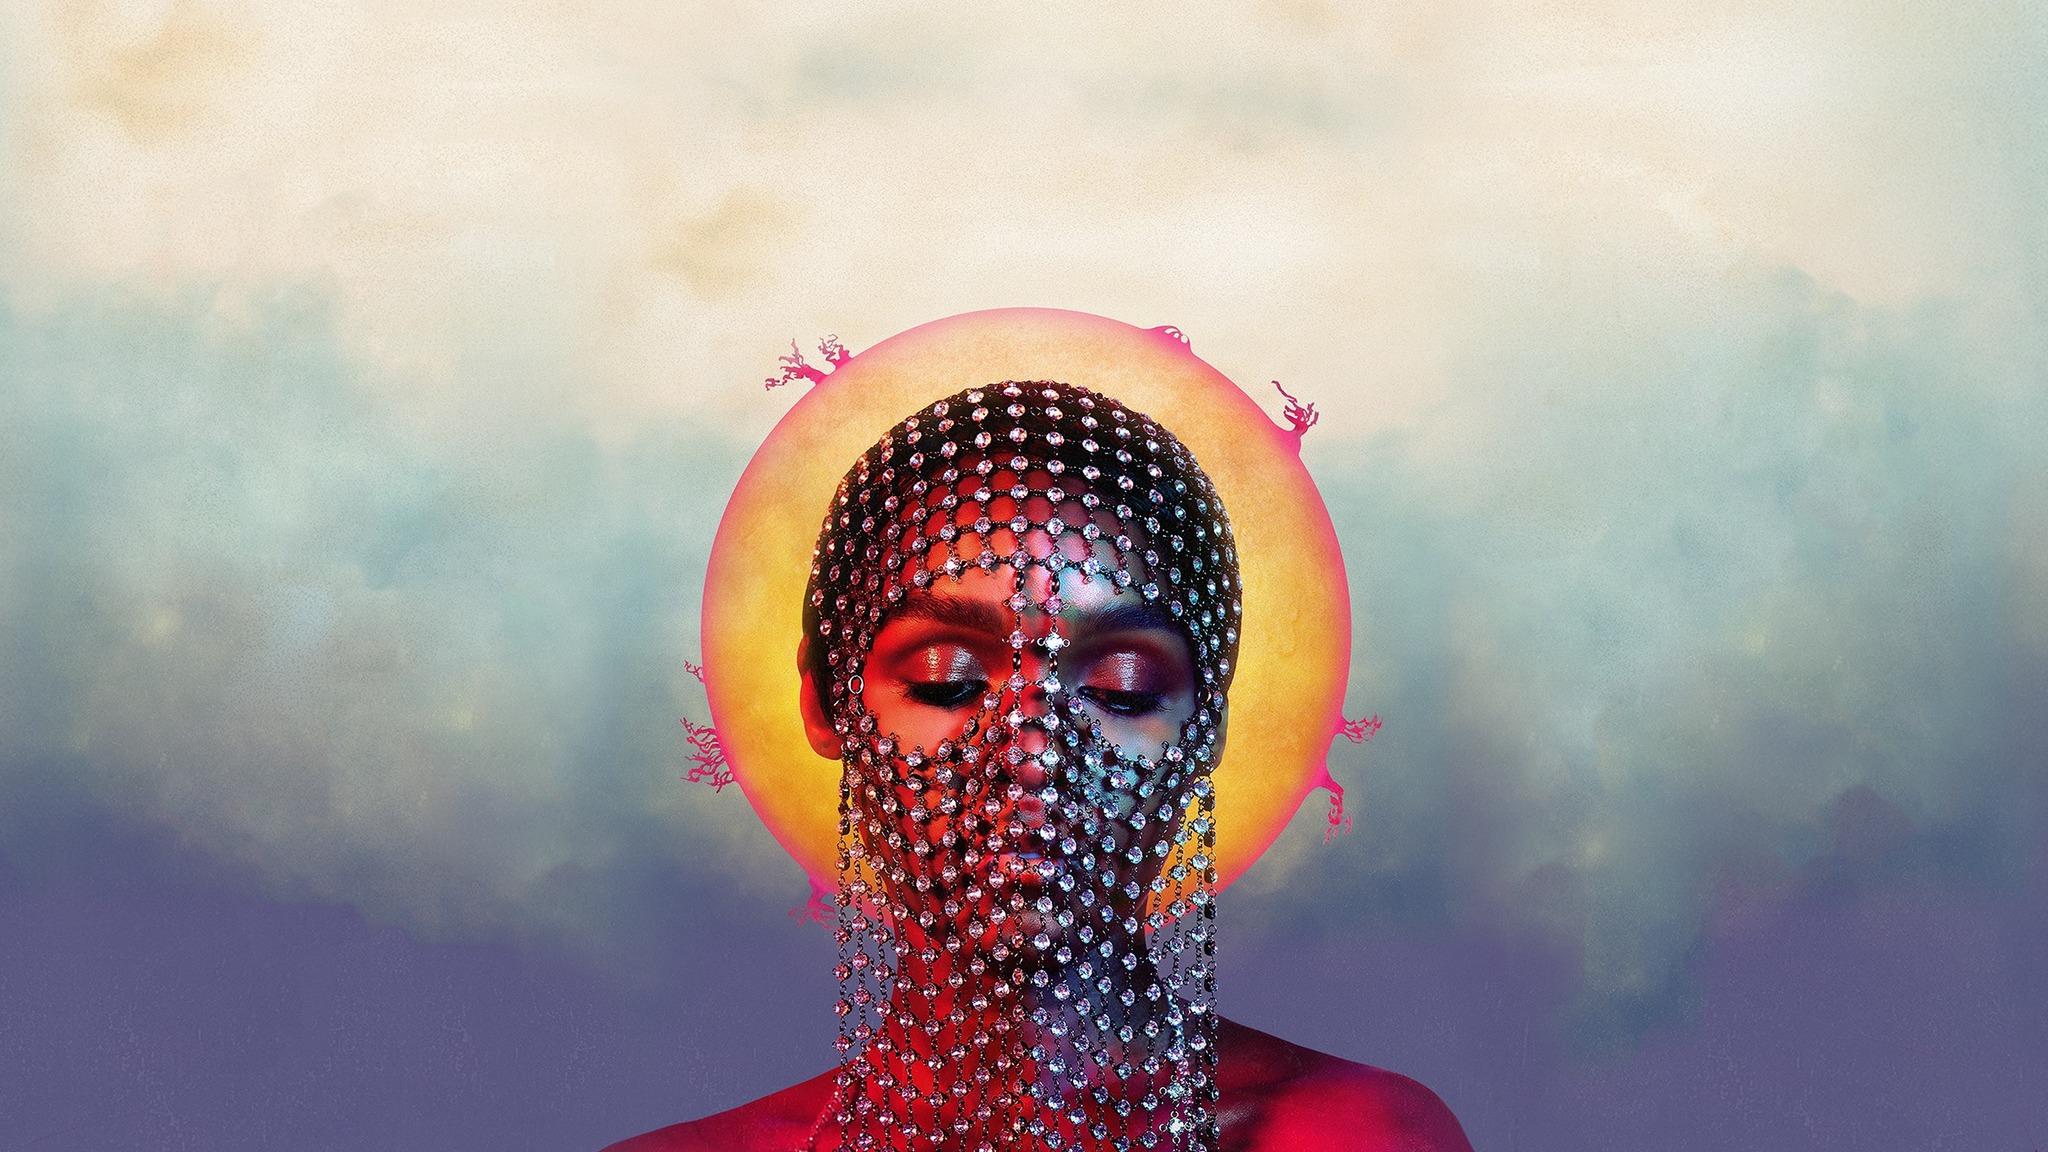 Janelle Monáe: Dirty Computer Review. The Weekly Spoon